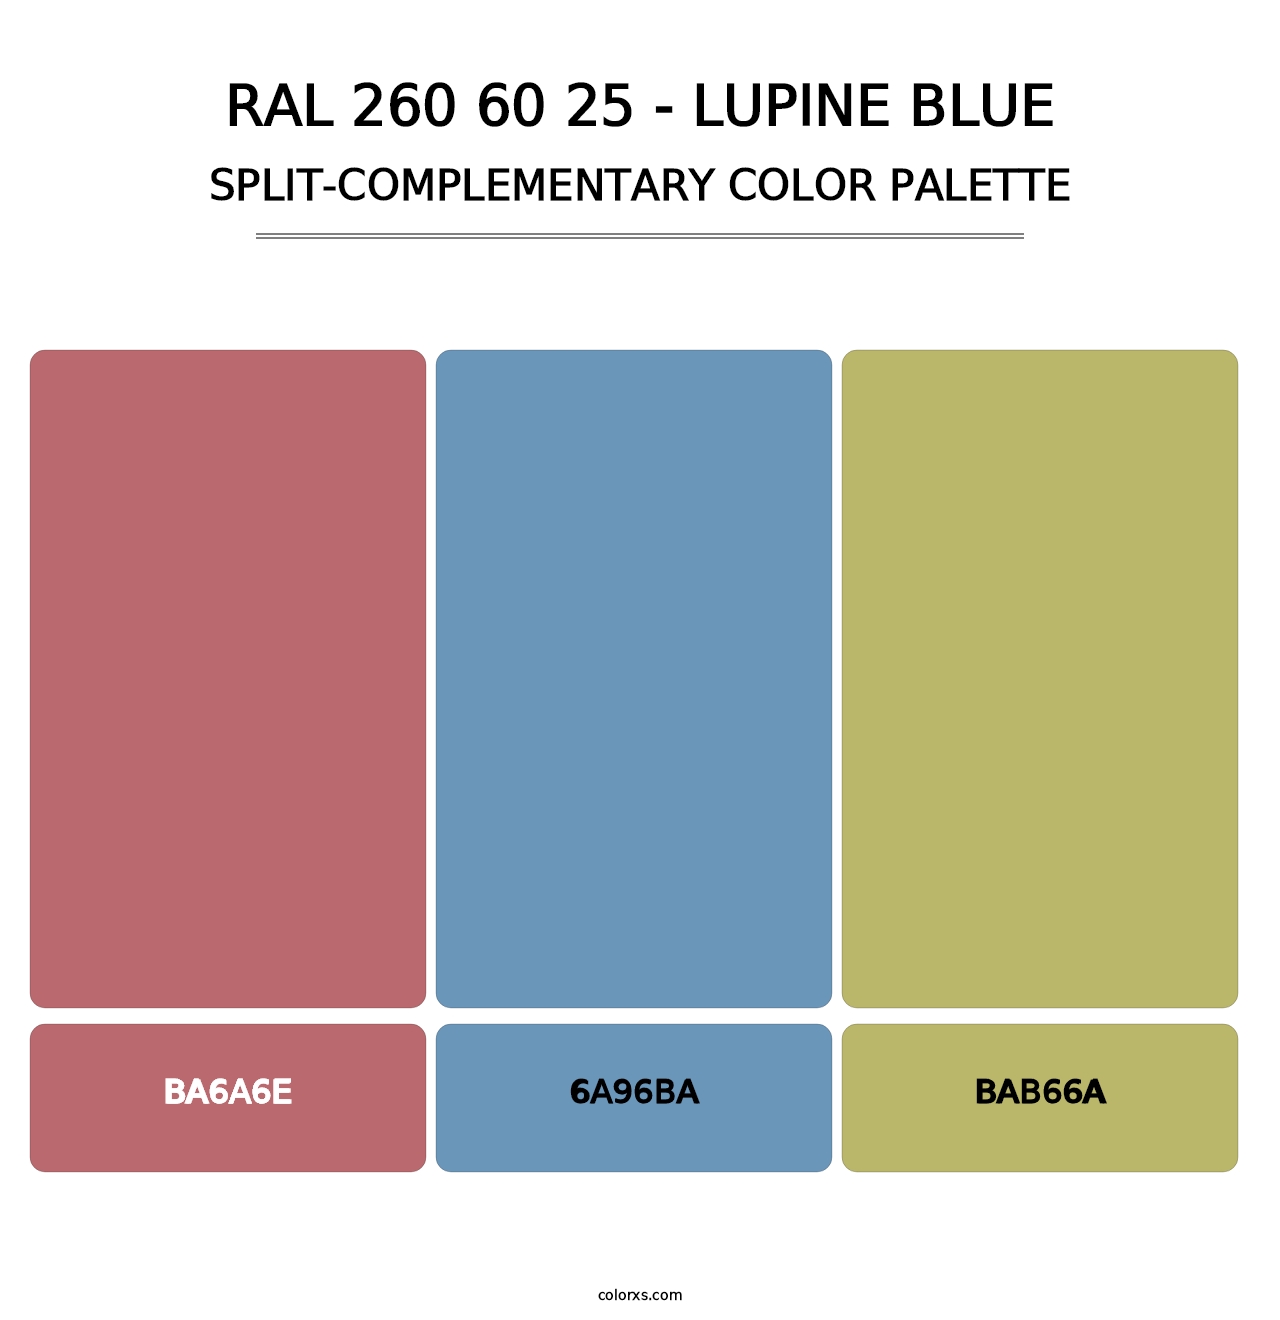 RAL 260 60 25 - Lupine Blue - Split-Complementary Color Palette